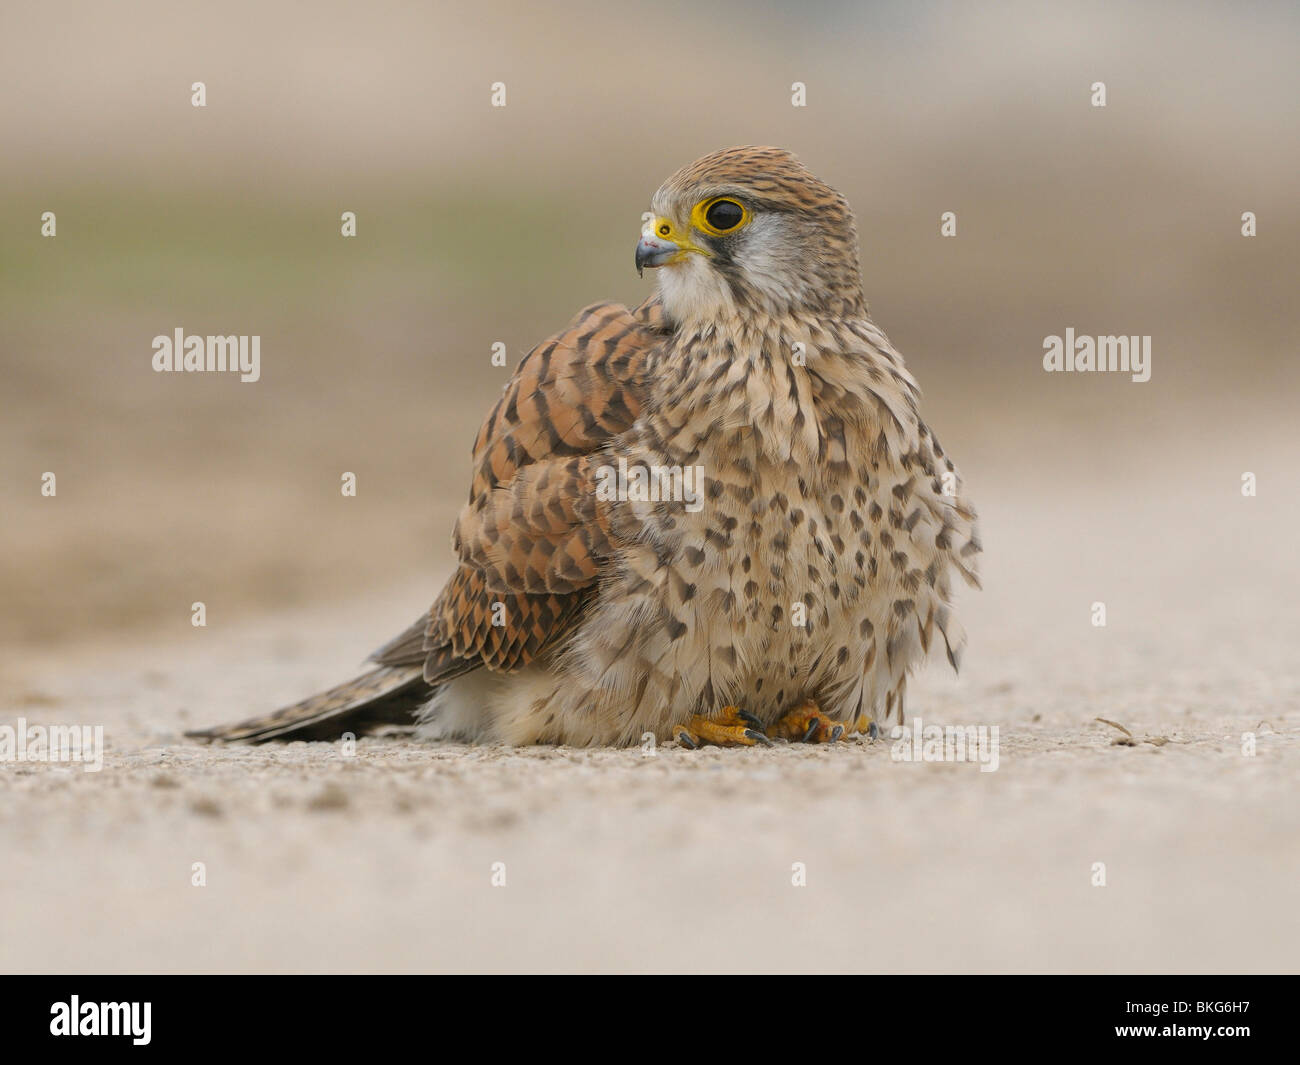 Female Kestrel takes a sand bath on the road, low point of view Stock Photo